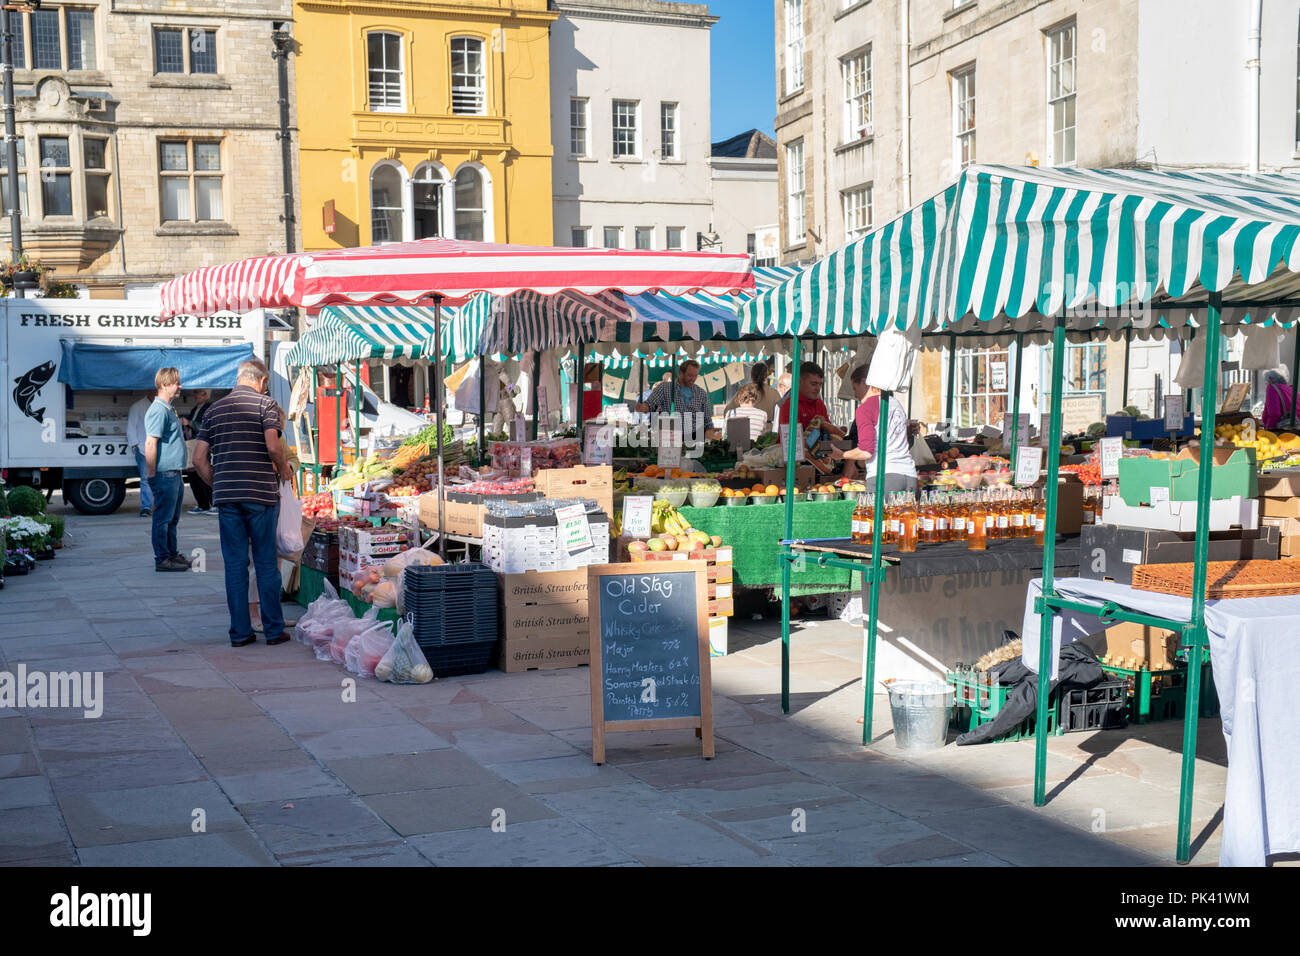 Cirencester mercato charter. Cirencester, Cotswolds, Gloucestershire, Inghilterra Foto Stock